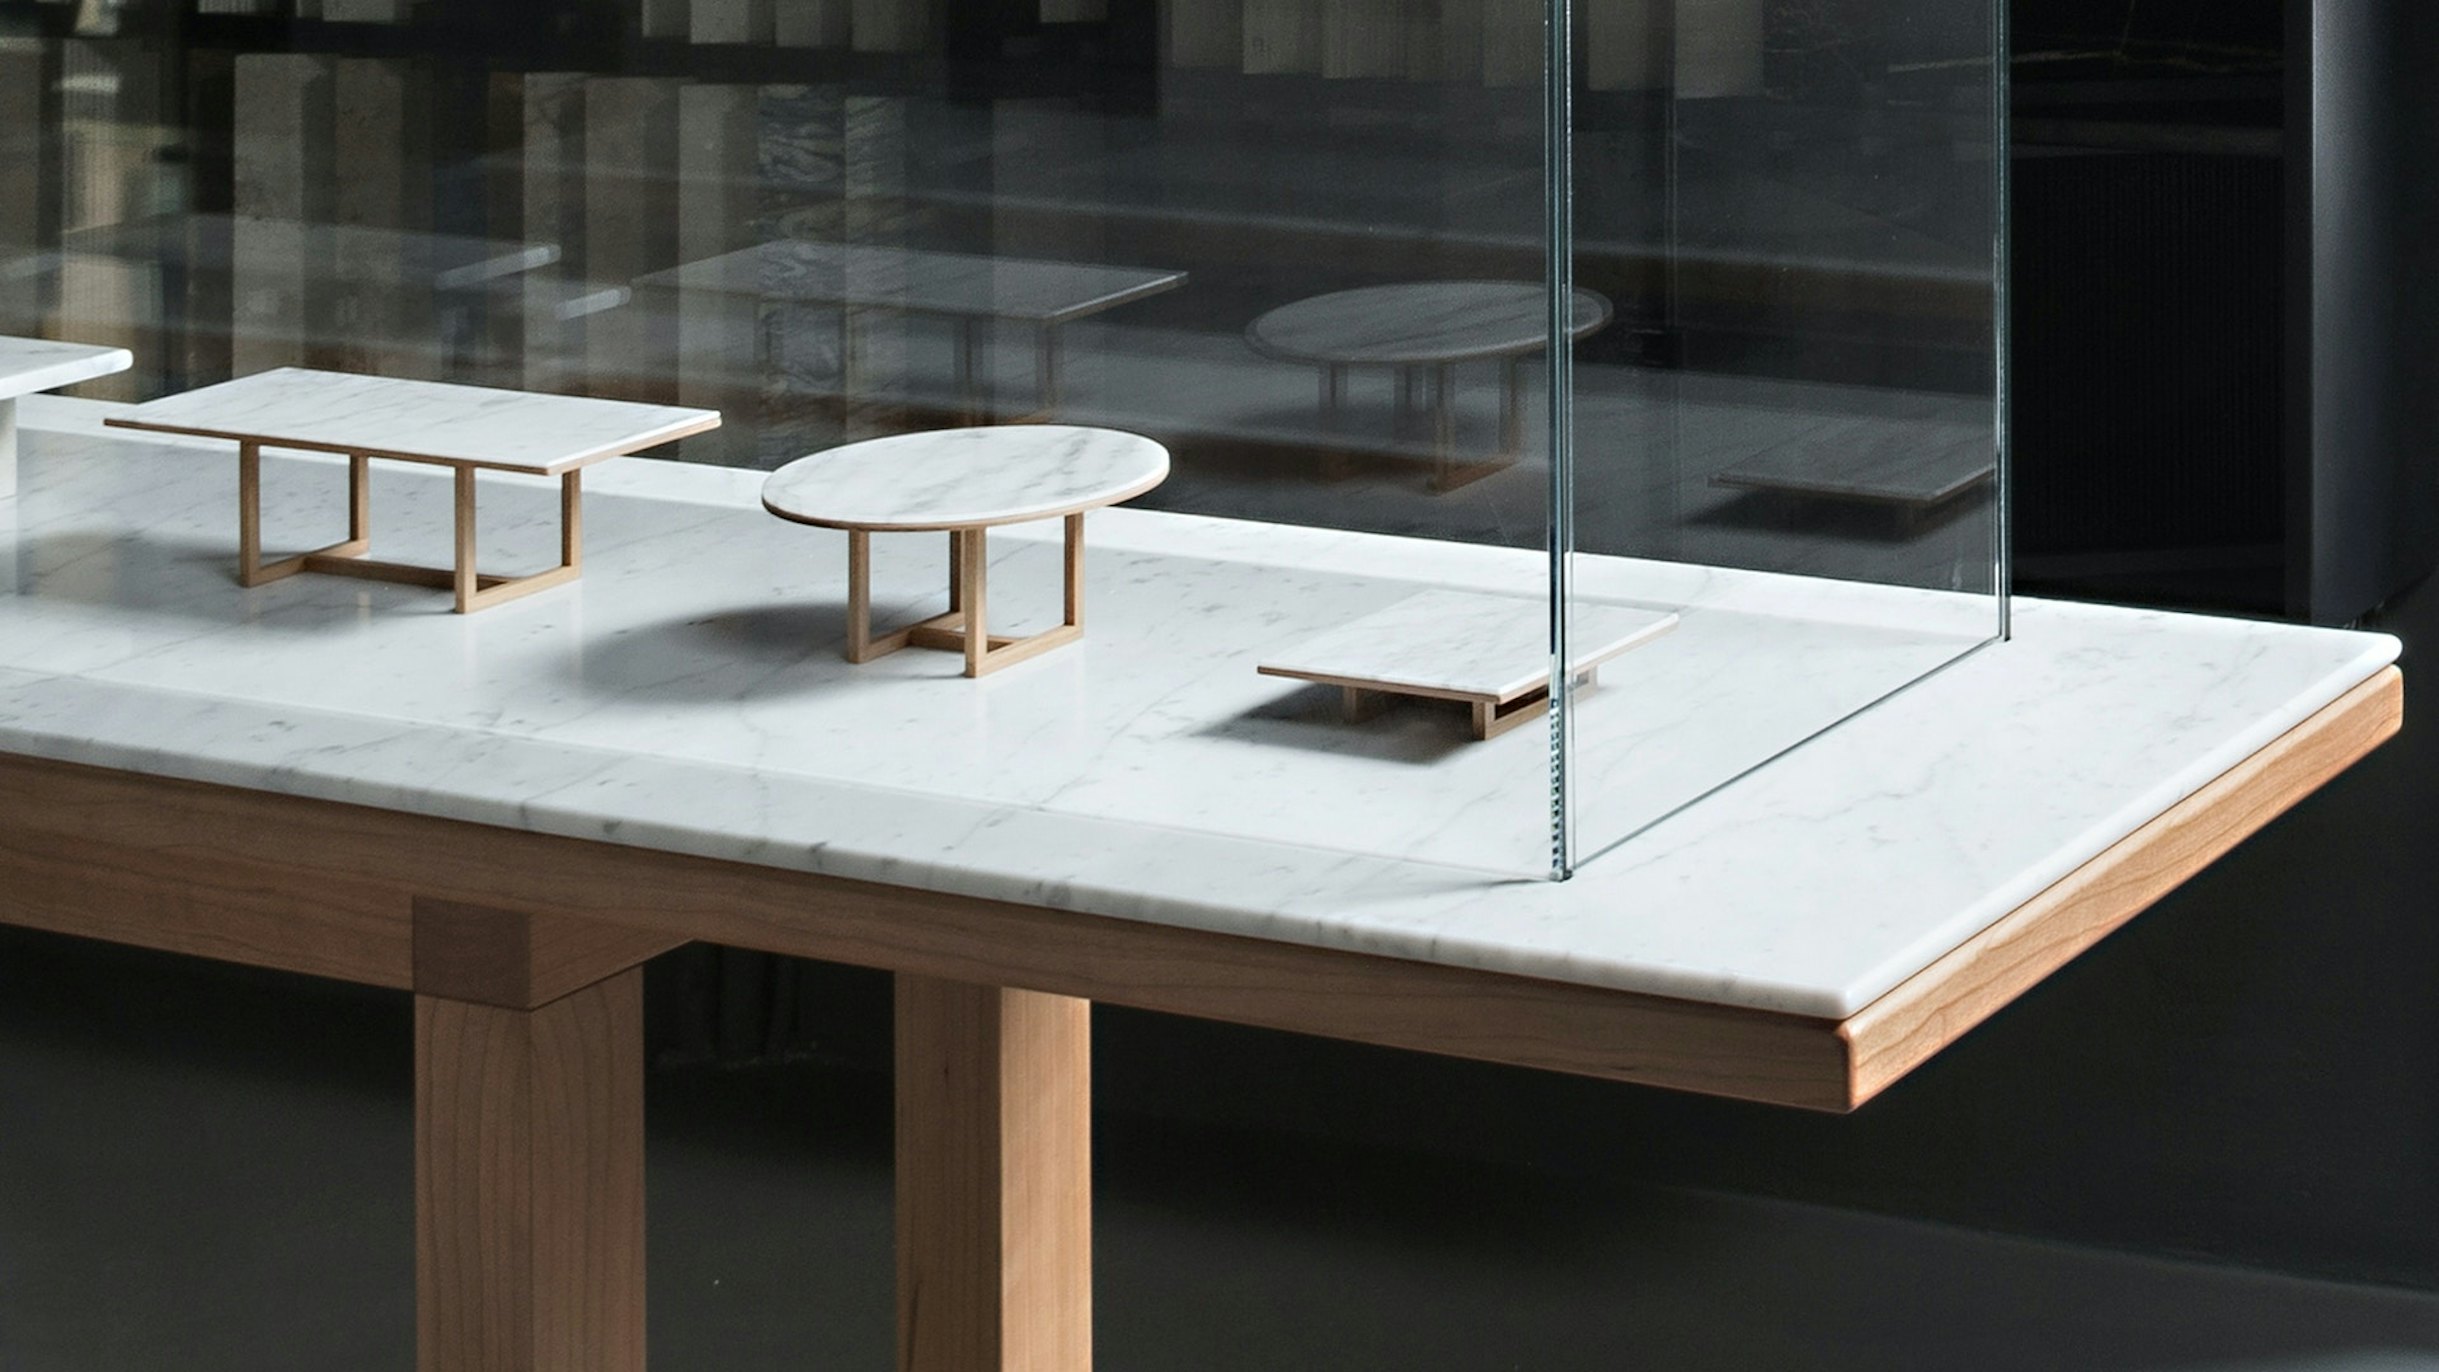 Miniature 'Span' Indoor Dining table ‘circle’ | Interactive image